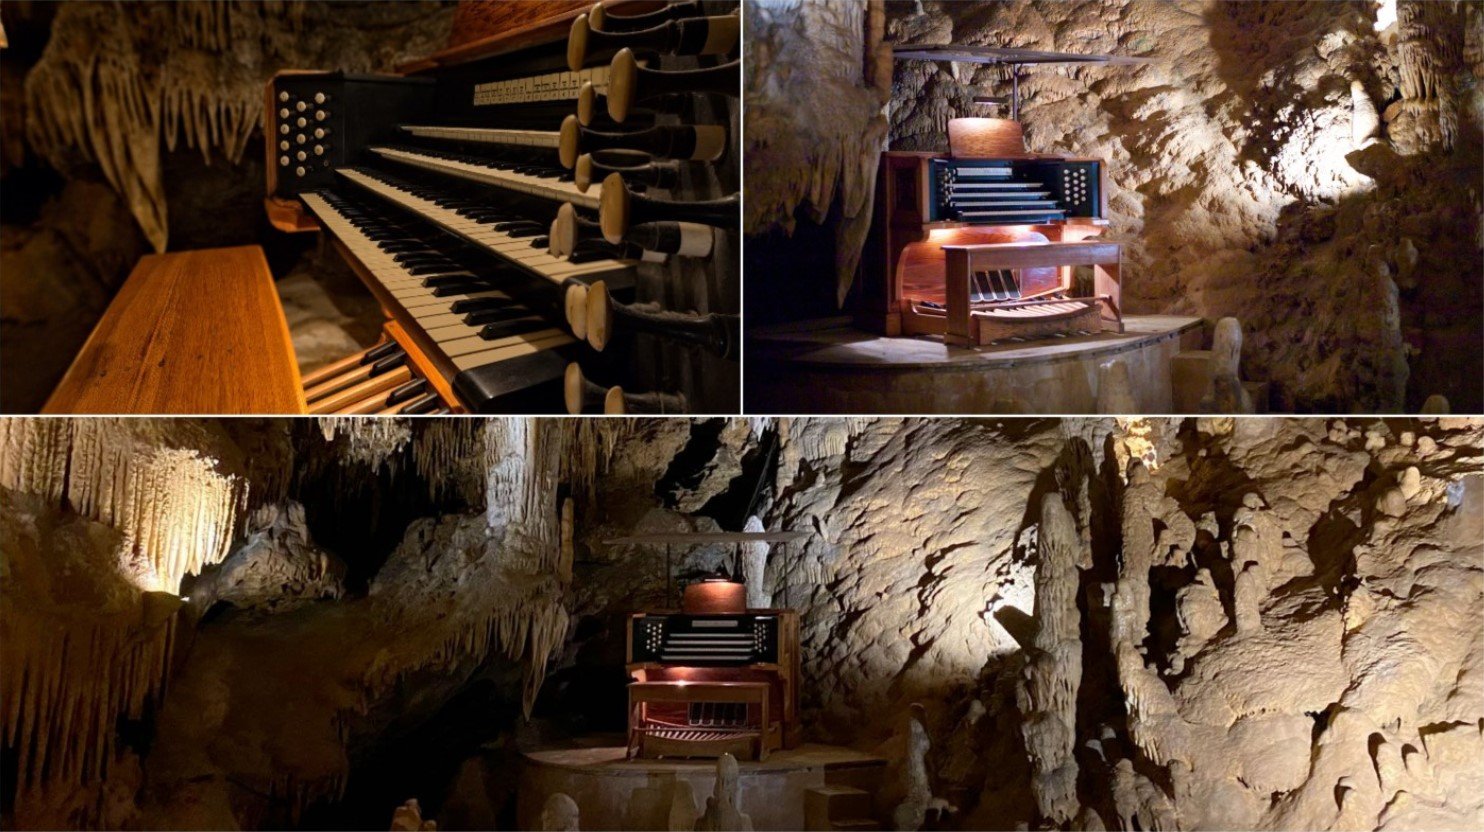 A Collage of Three Photos of the Great Stalacpipe Organ in the Luray Caverns